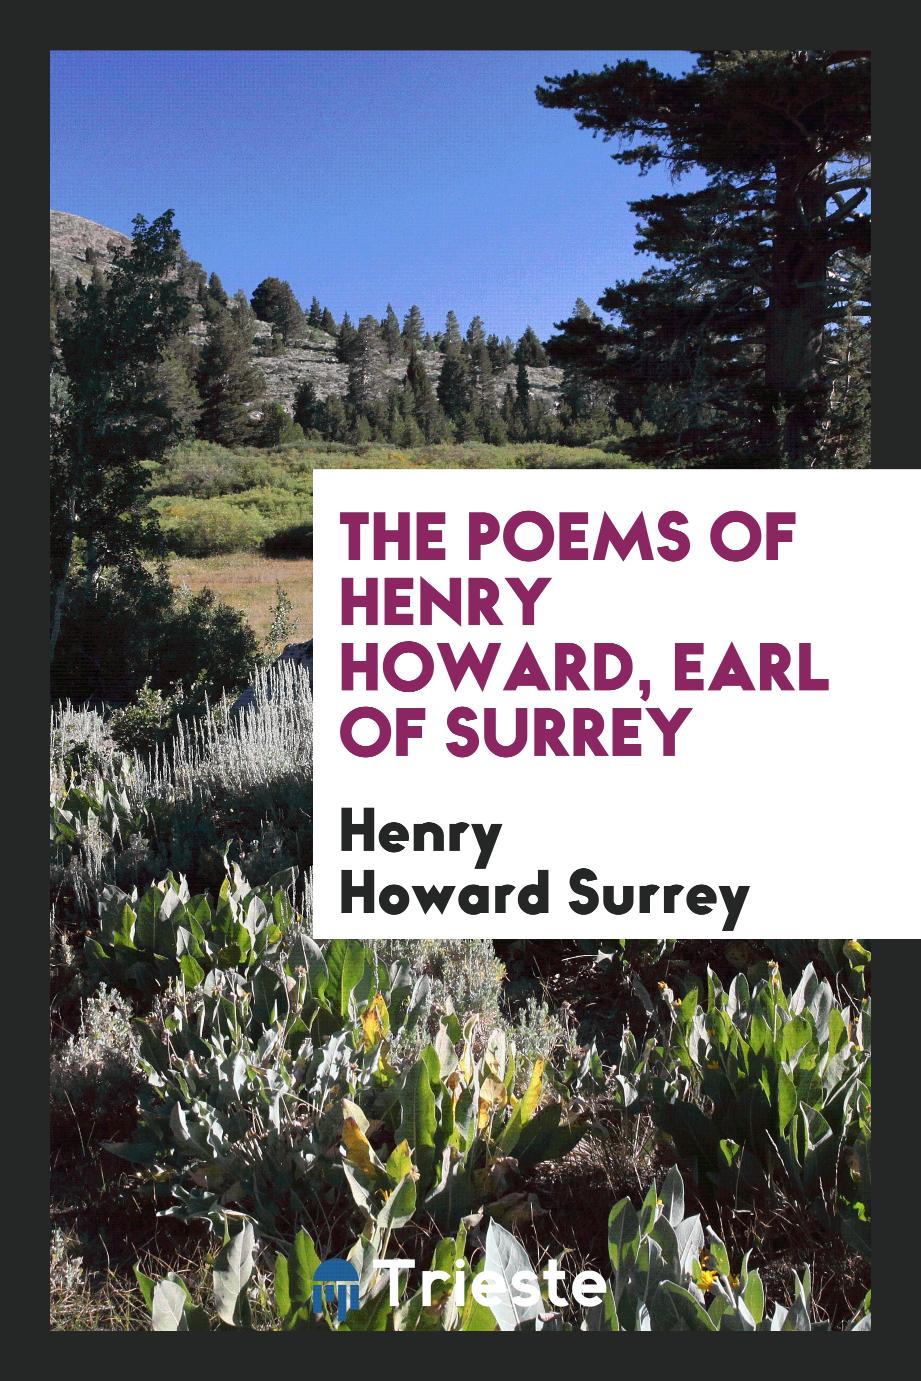 The poems of Henry Howard, earl of Surrey